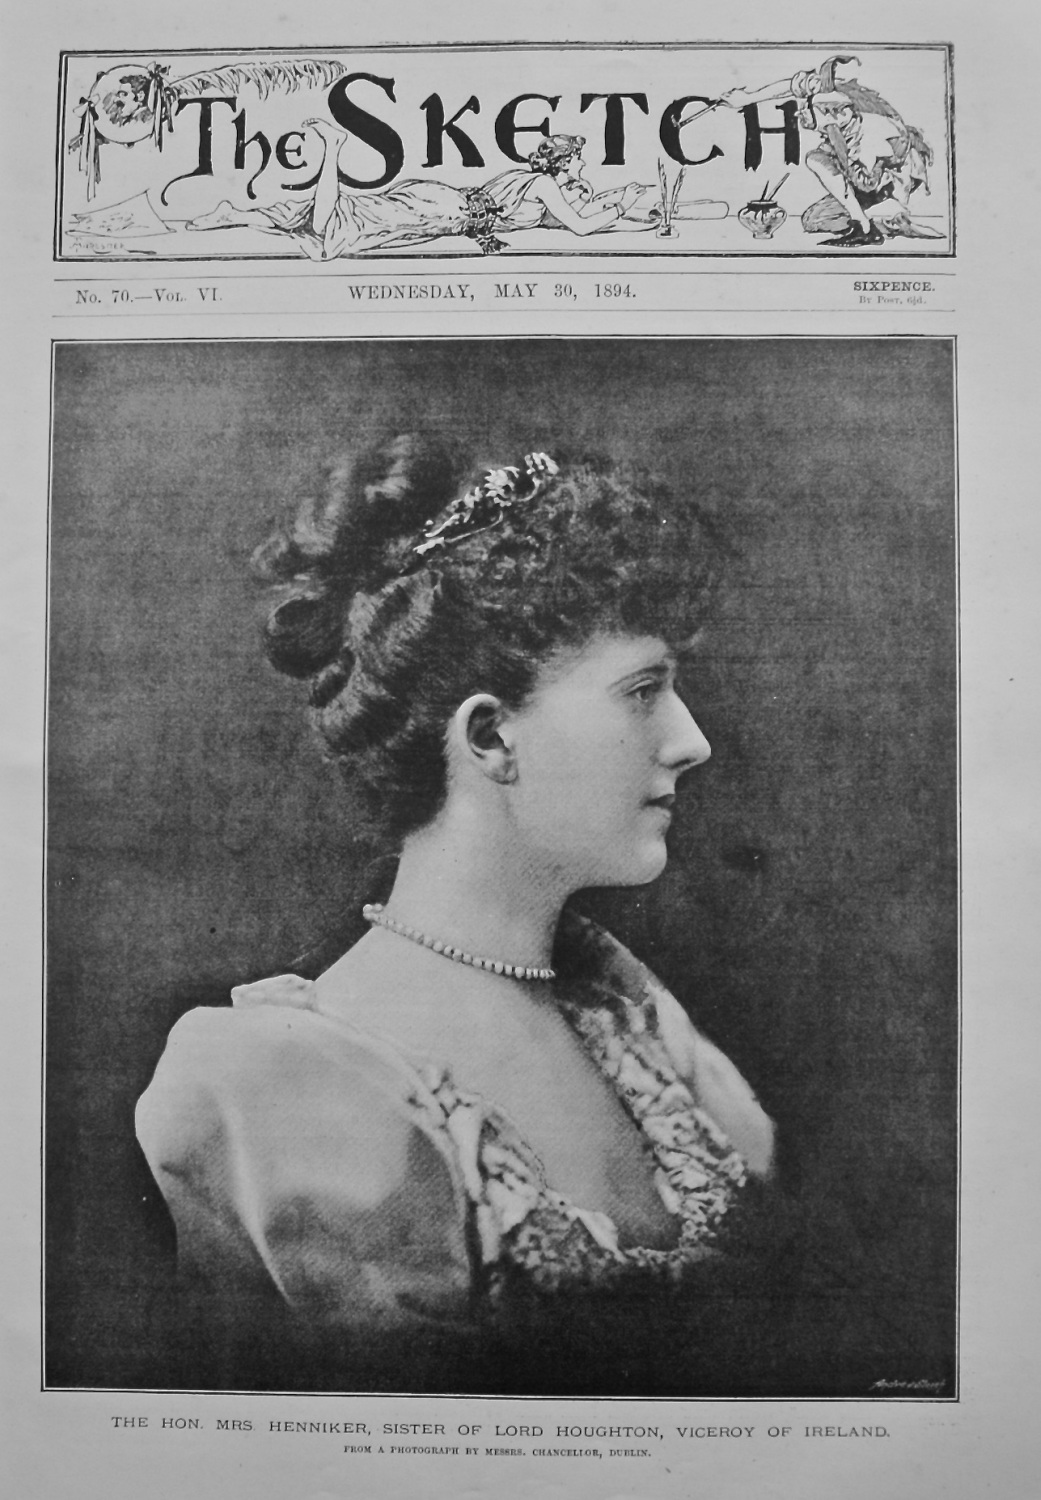 The Hon. Mrs. Henniker, Sister of Lord Houghton, Viceroy of Ireland. 1894.